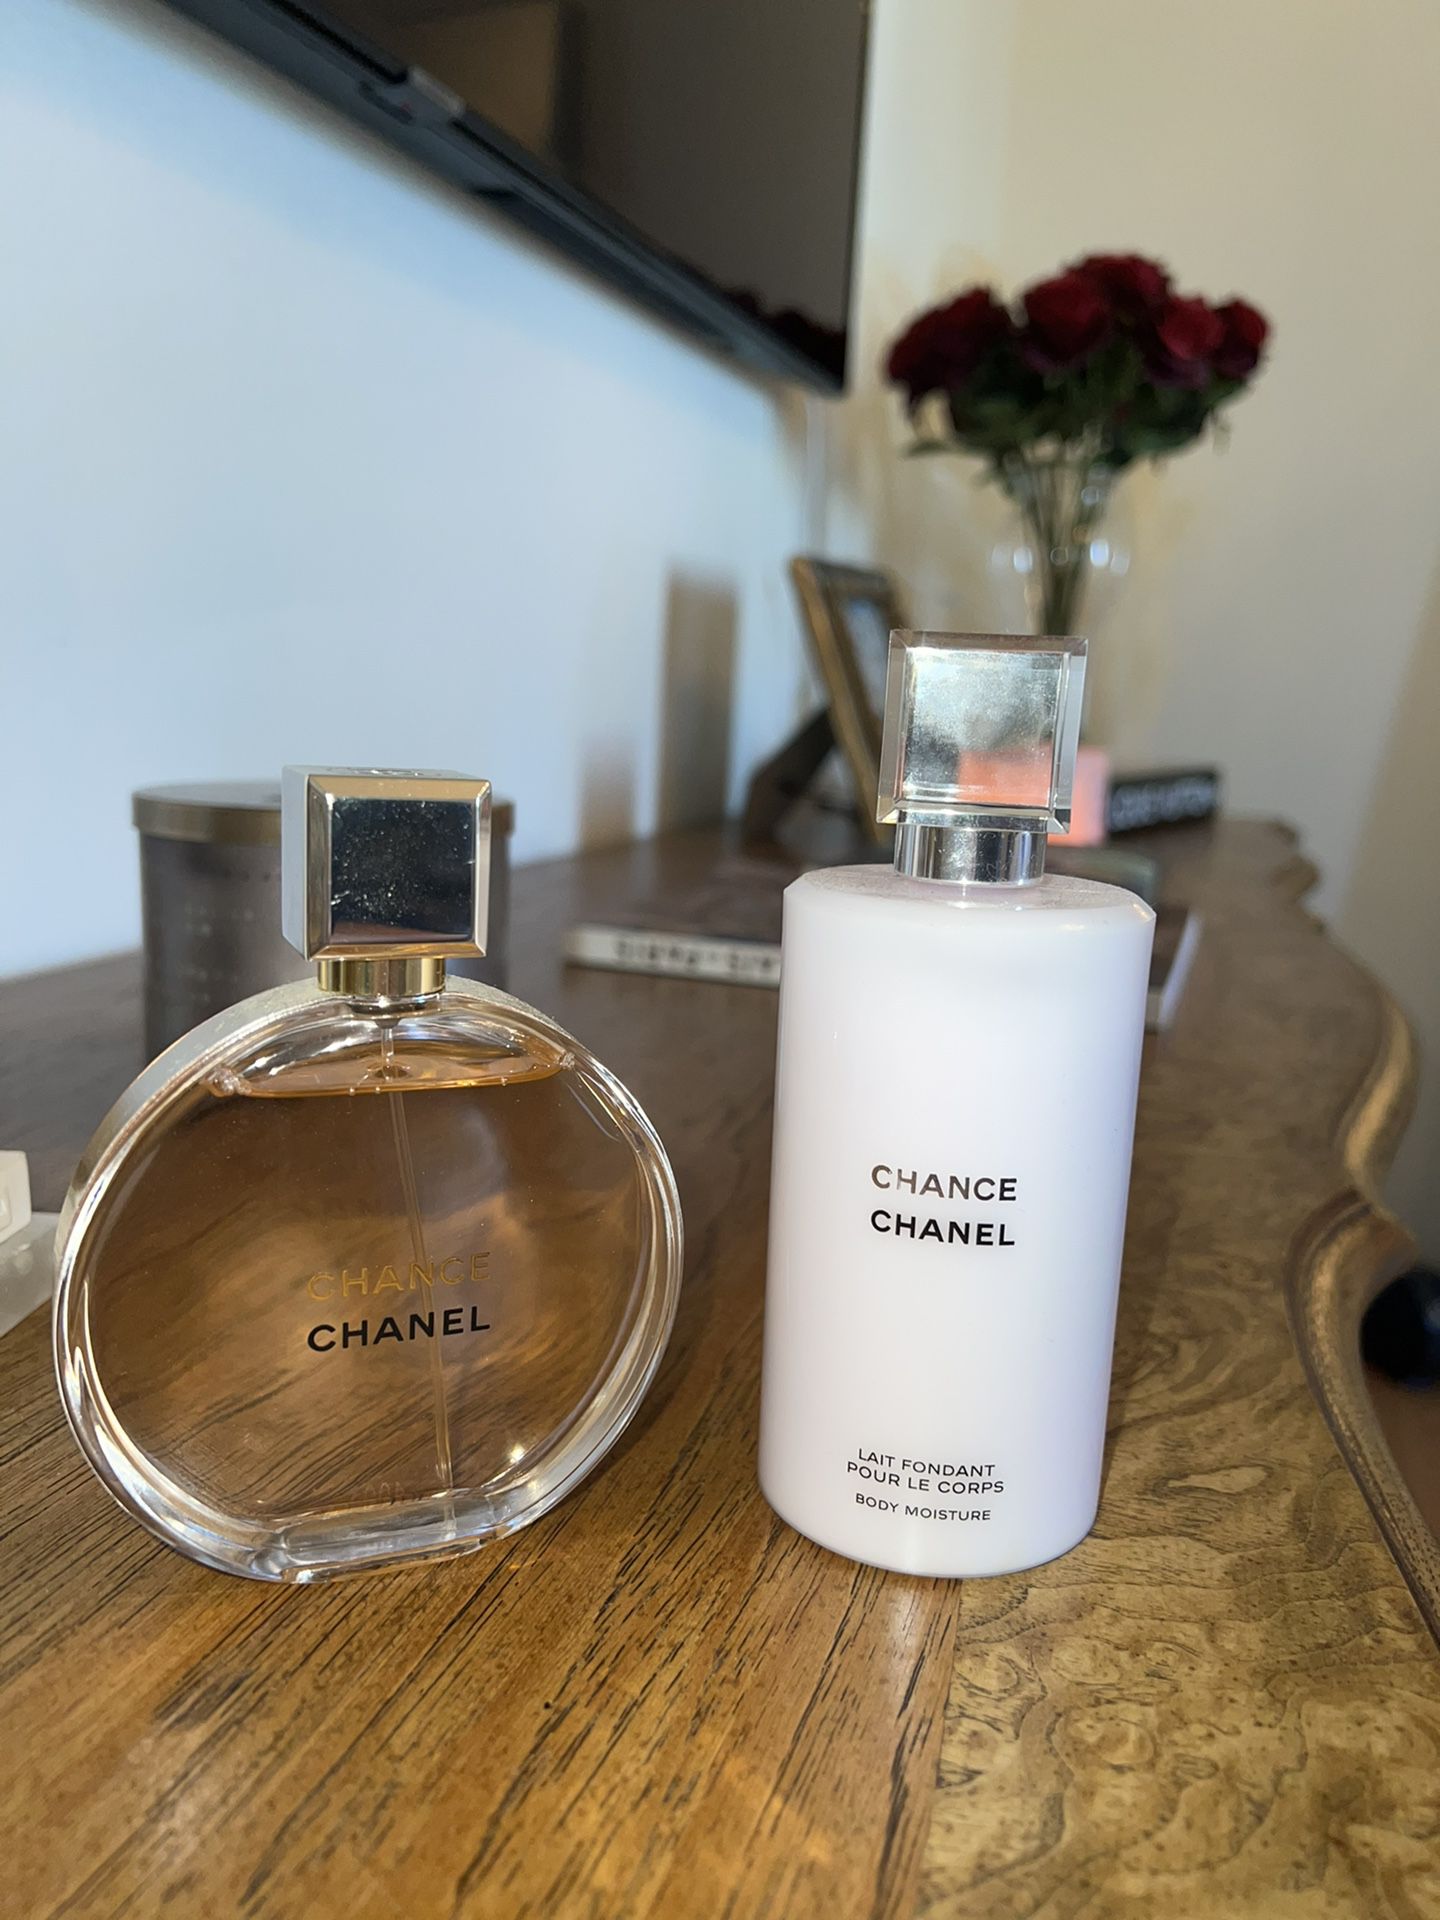 New* Authentic Chanel “Bleu de Chanel” 3.4 fl oz After Shave Lotion for Men  for Sale in Los Angeles, CA - OfferUp